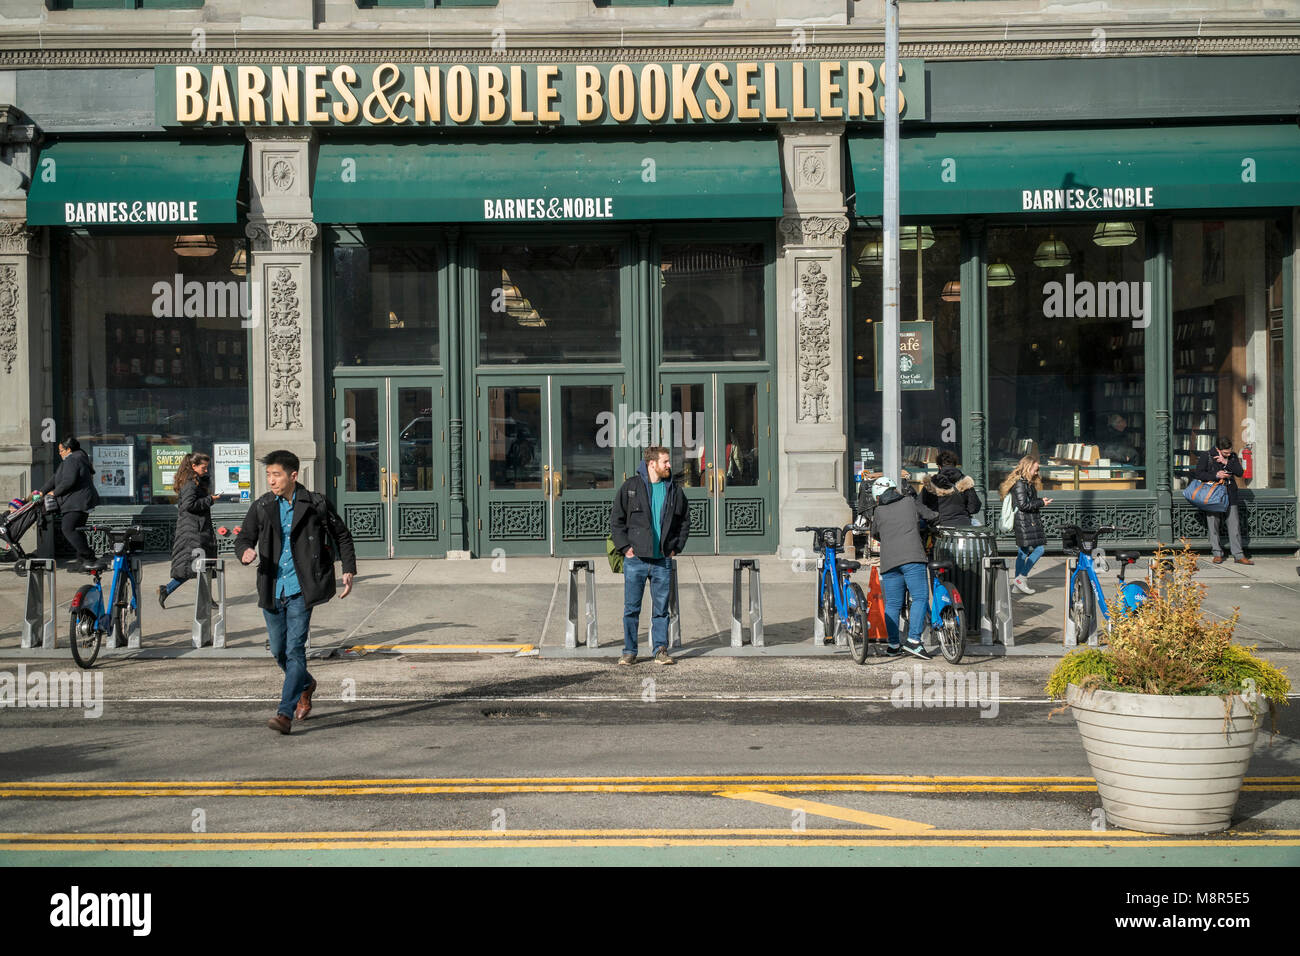 A Barnes & Noble bookstore off of Union Square in New York is seen on Tuesday, March 13, 2018. After a poor holiday season Barnes & Noble recently reported that it is laying off employees as it adjusts its business model. (Â© Richard B. Levine) Stock Photo